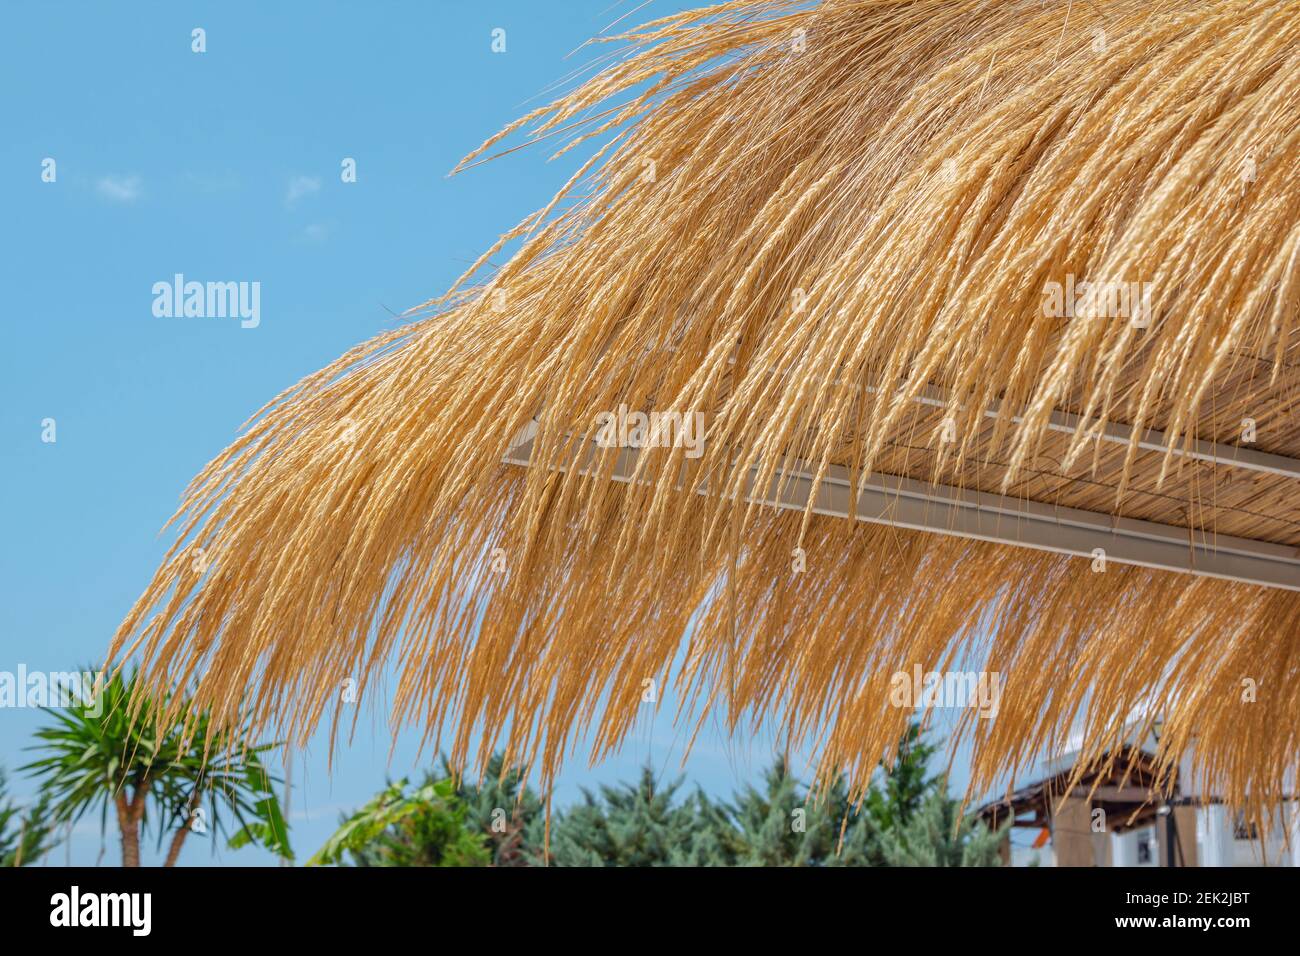 Part view of straw umbrella close up over blue sky. Summer resort. Stock Photo